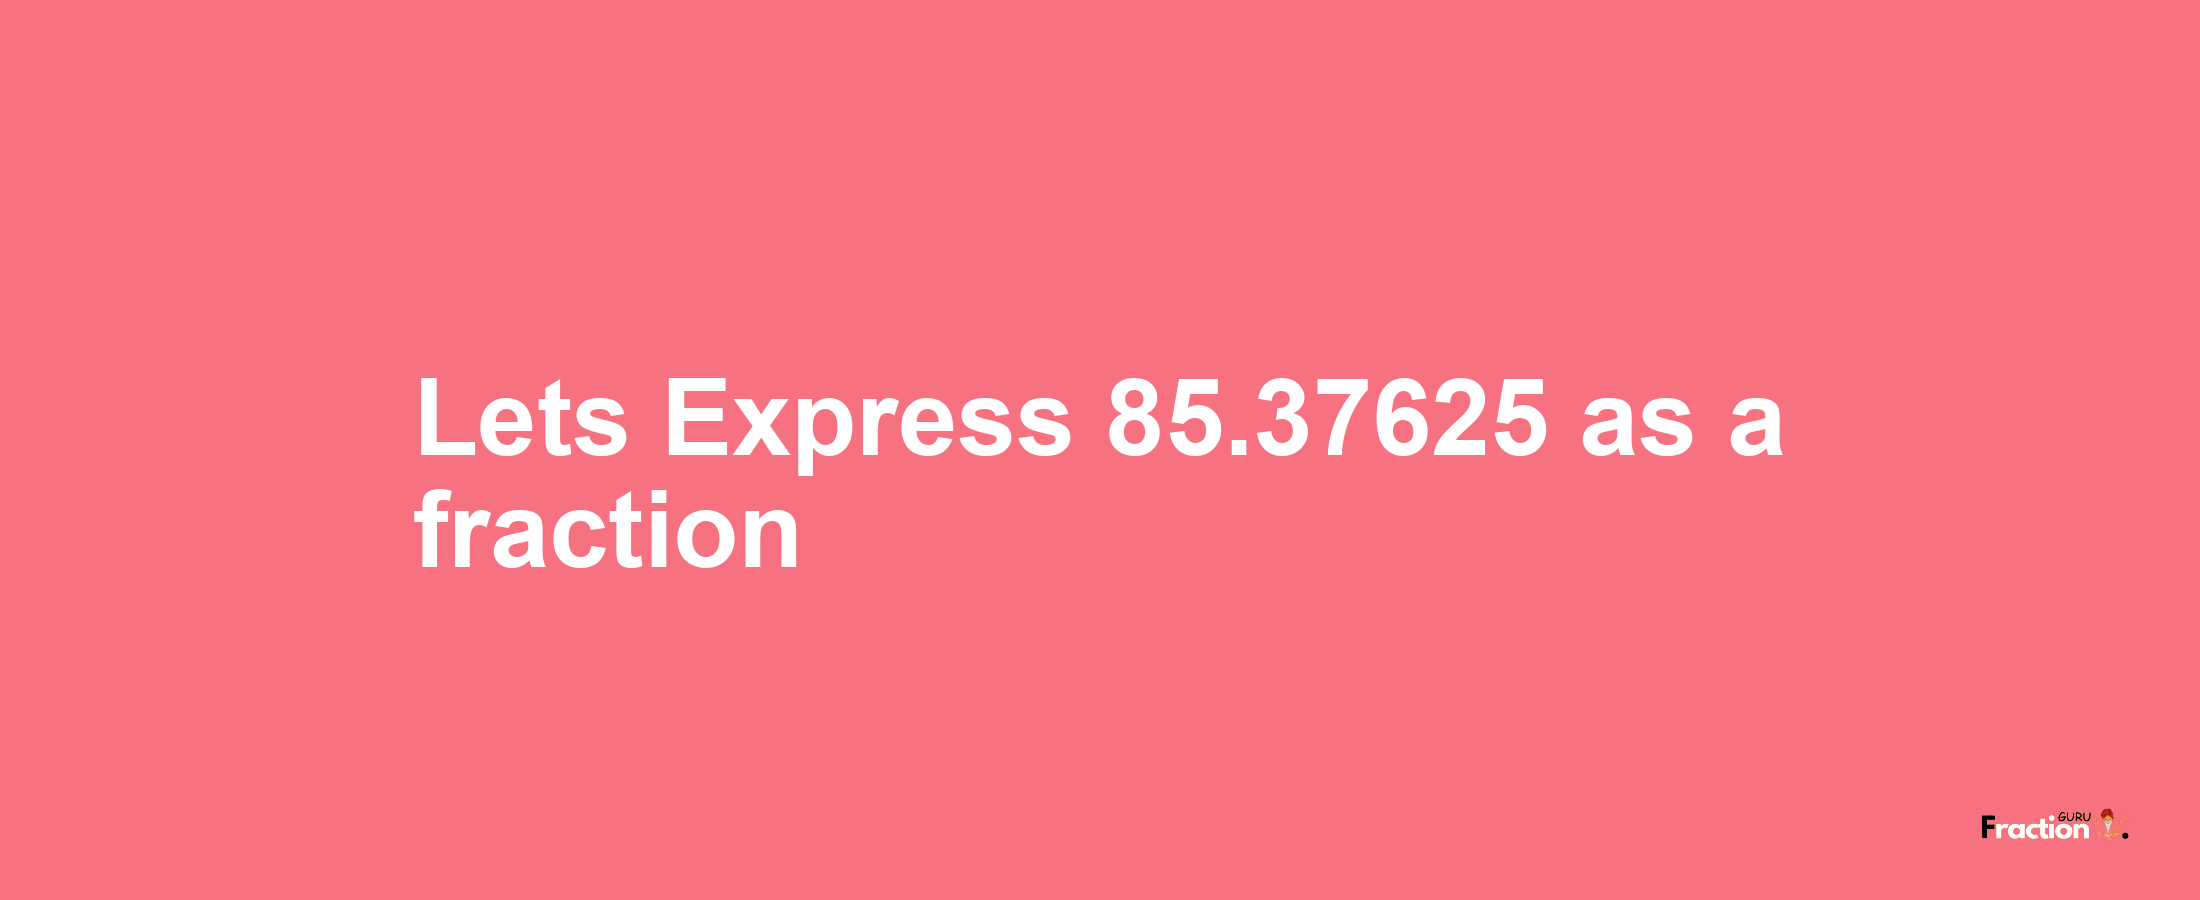 Lets Express 85.37625 as afraction